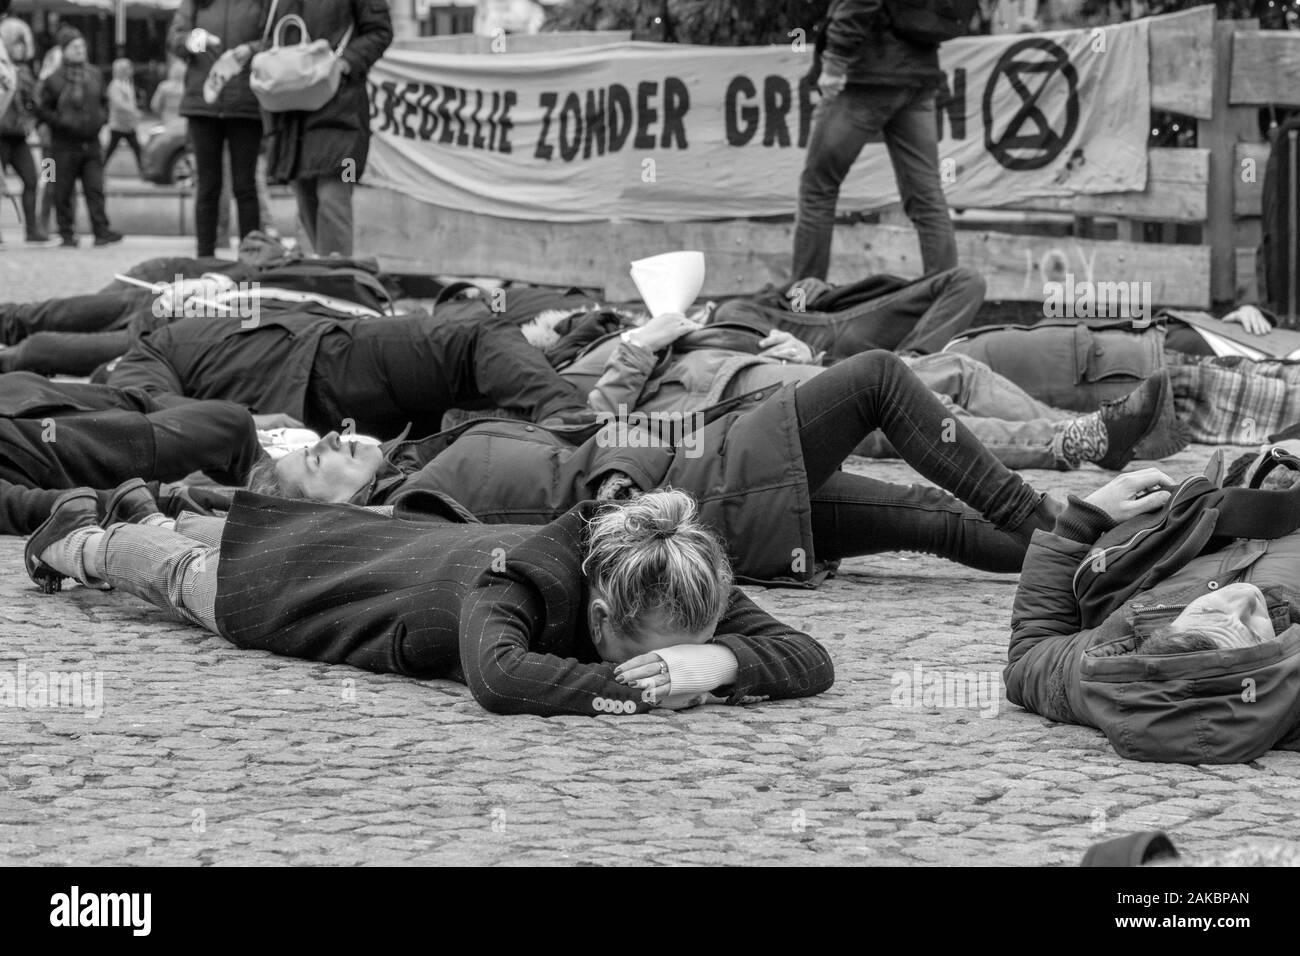 Died Protesters At The The Rebellion Extinction Group At The Demonstration On The Dam At 6-1-2020 Amsterdam The Netherlands 2020 In Black And White Stock Photo